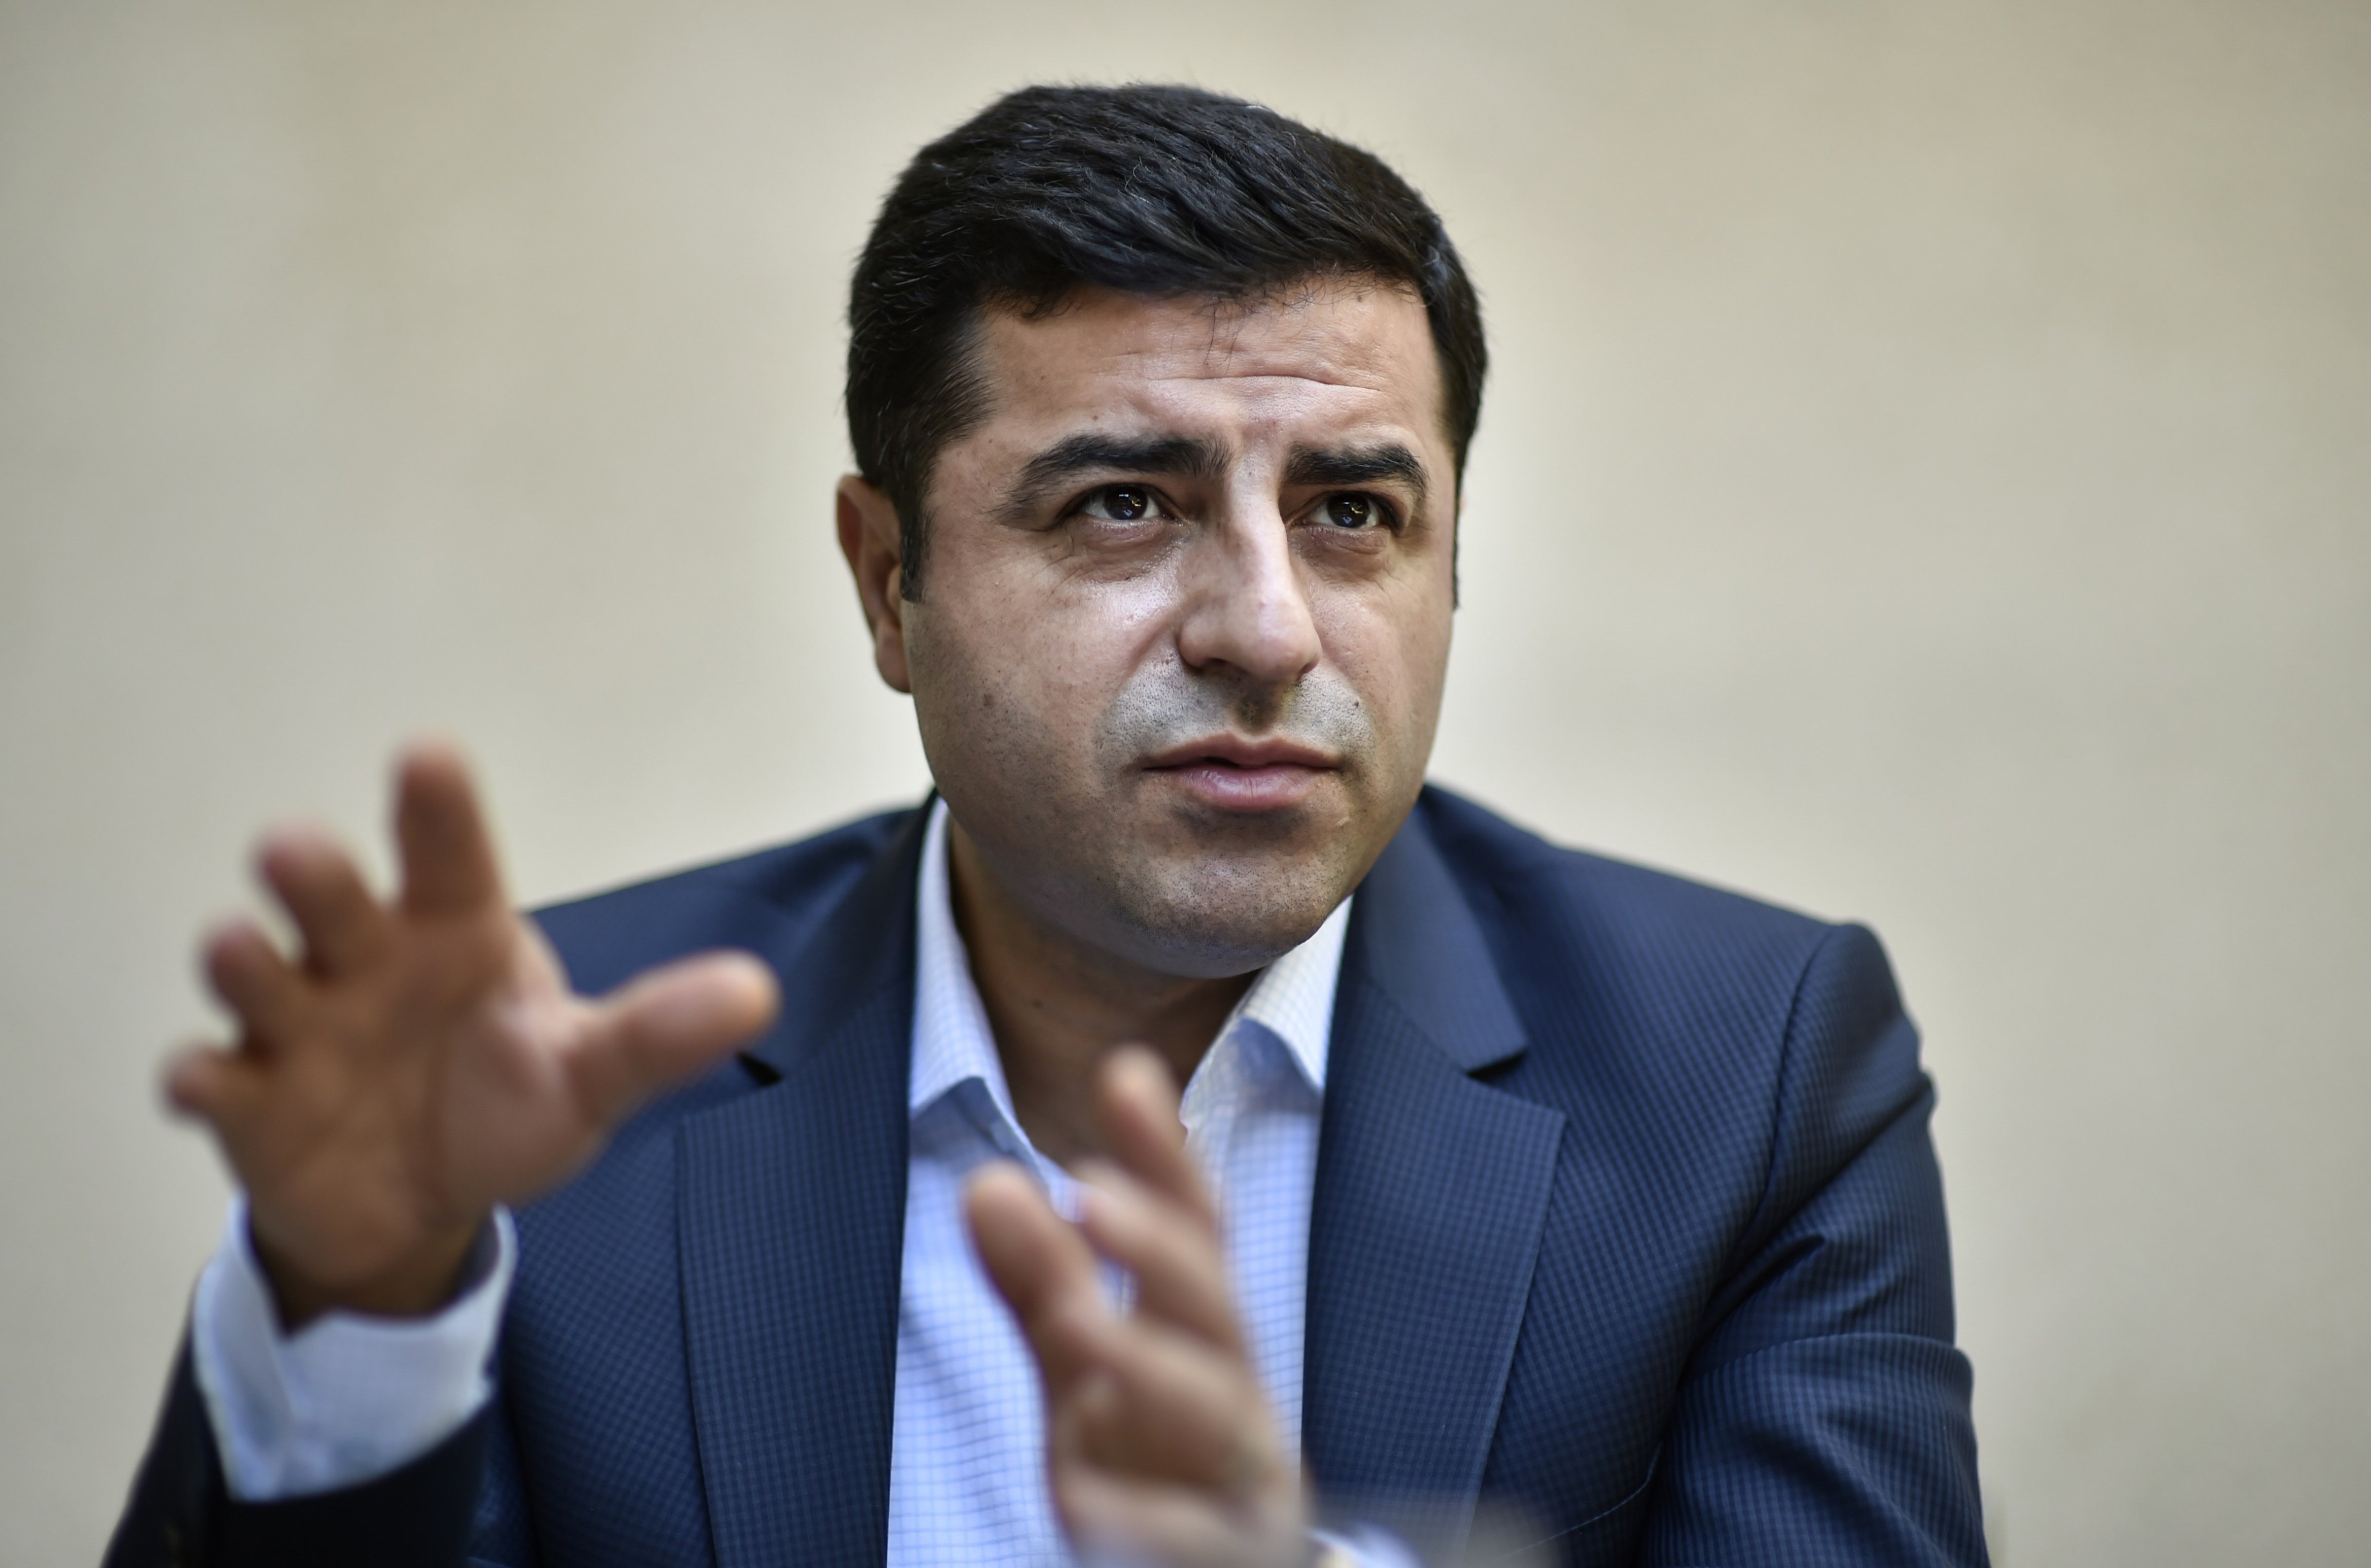 Selahattin Demirtas, co-leader of Turkey's pro-Kurdish People's Democratic Party (HDP), speaks during an interview with AFP in Brussels on Aug. 6, 2015.